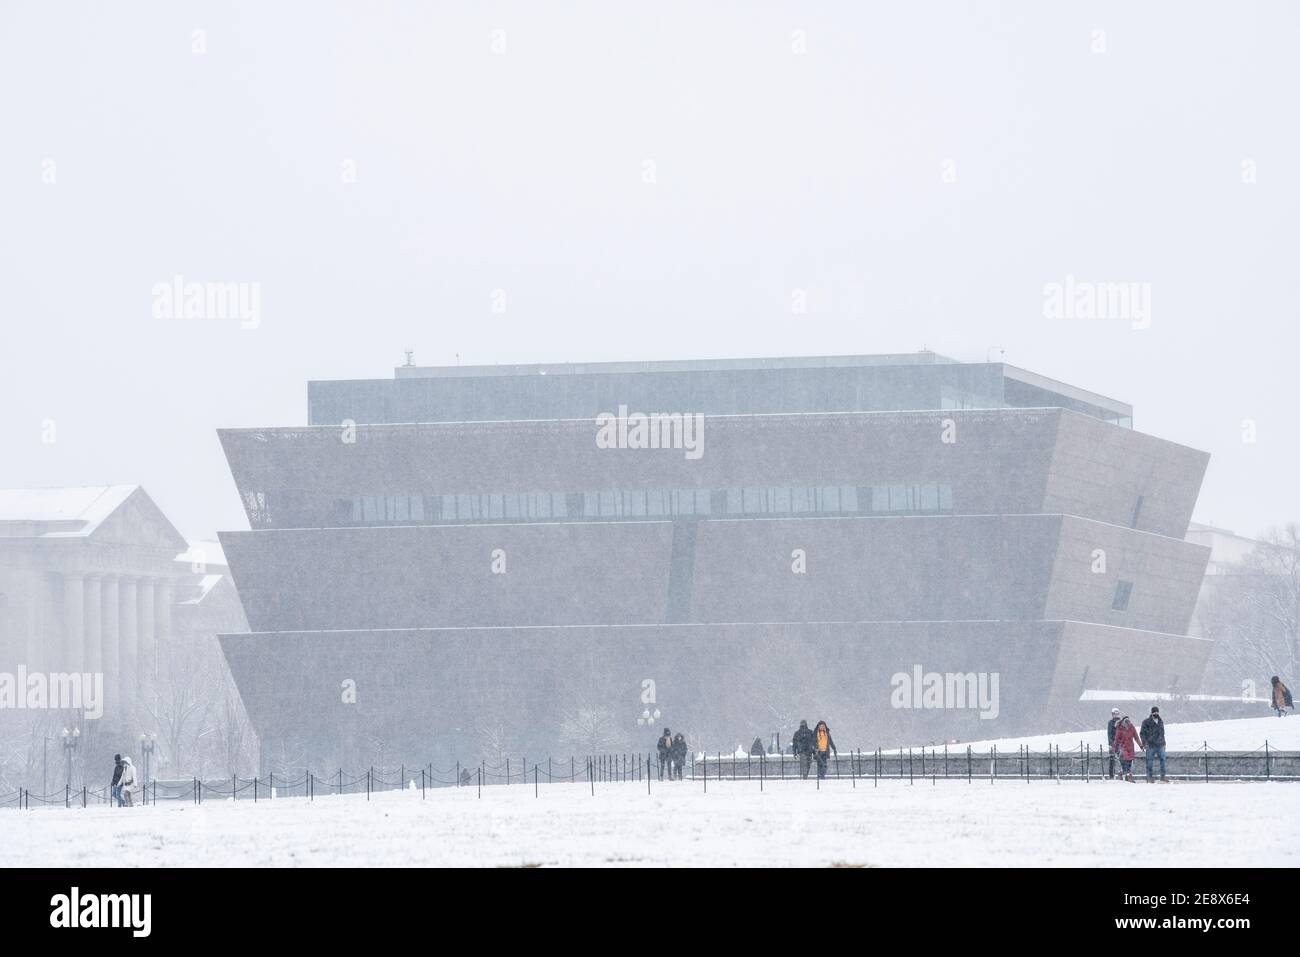 Exterior view of the Smithsonian National Museum of African American History and Culture (NMAAHC) during a snow fall in Washington, D.C. Stock Photo